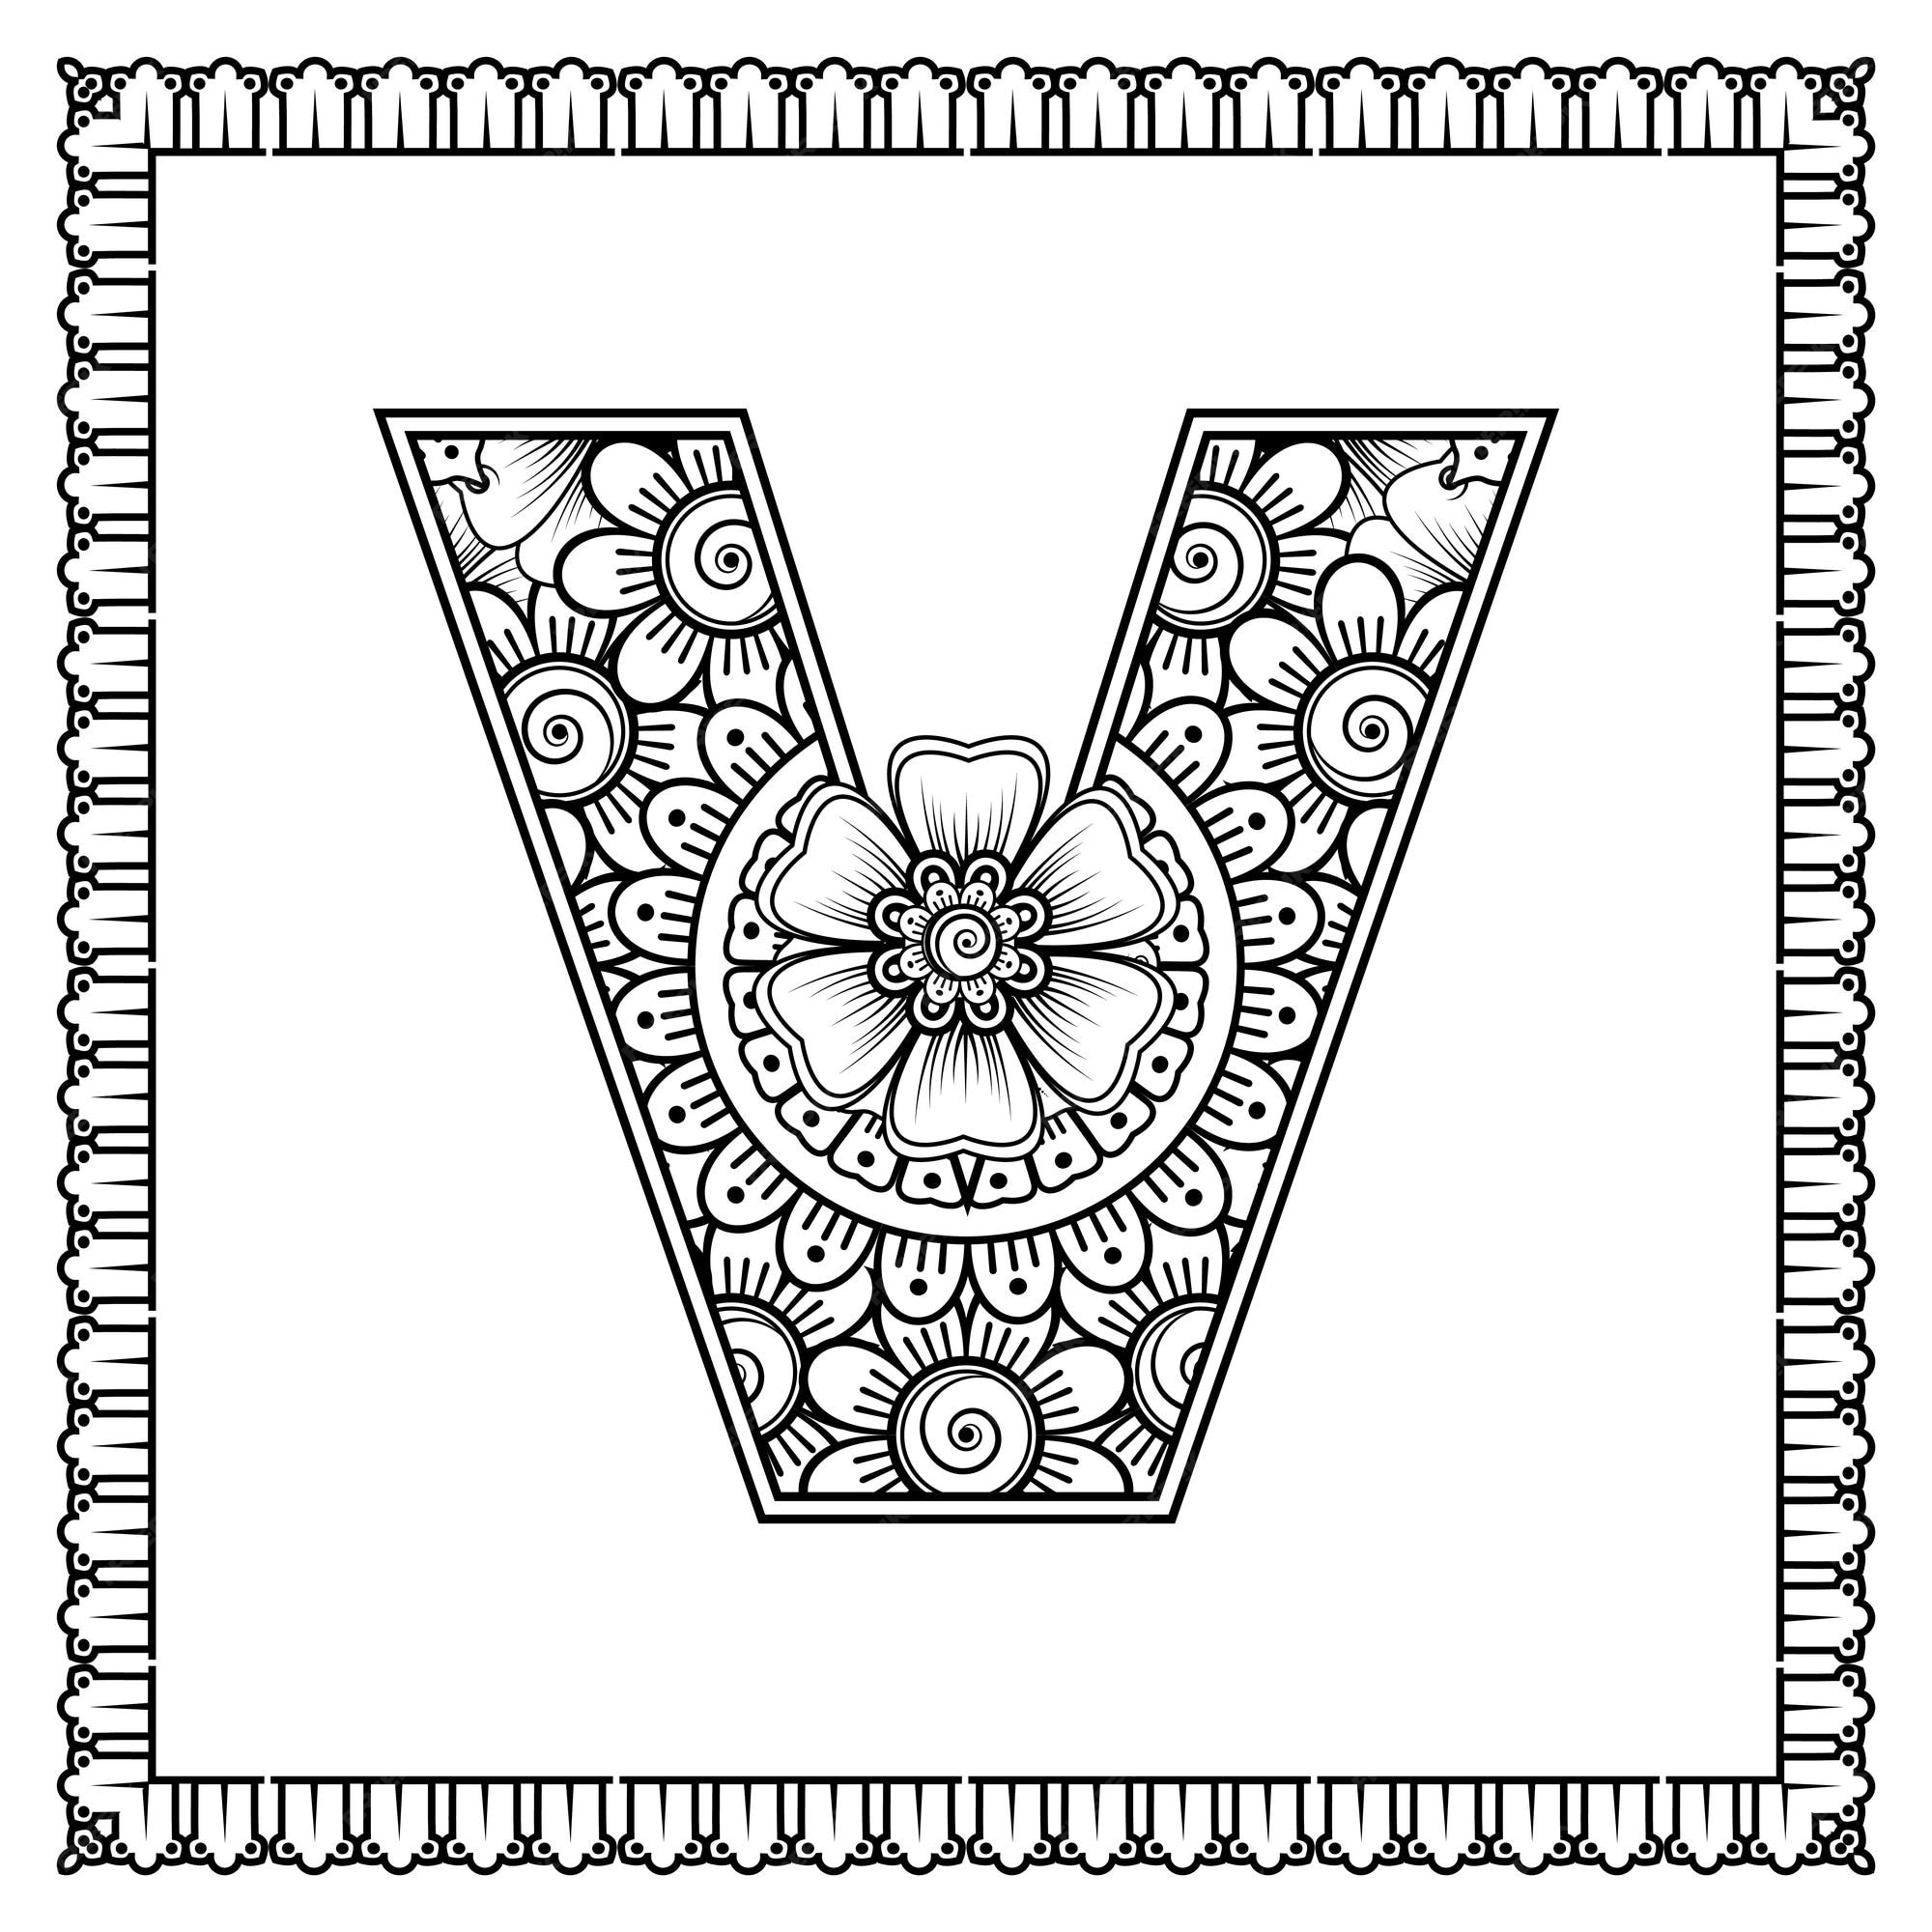 Premium vector letter v made of flowers in mehndi style coloring book page outline handdraw vector illustration